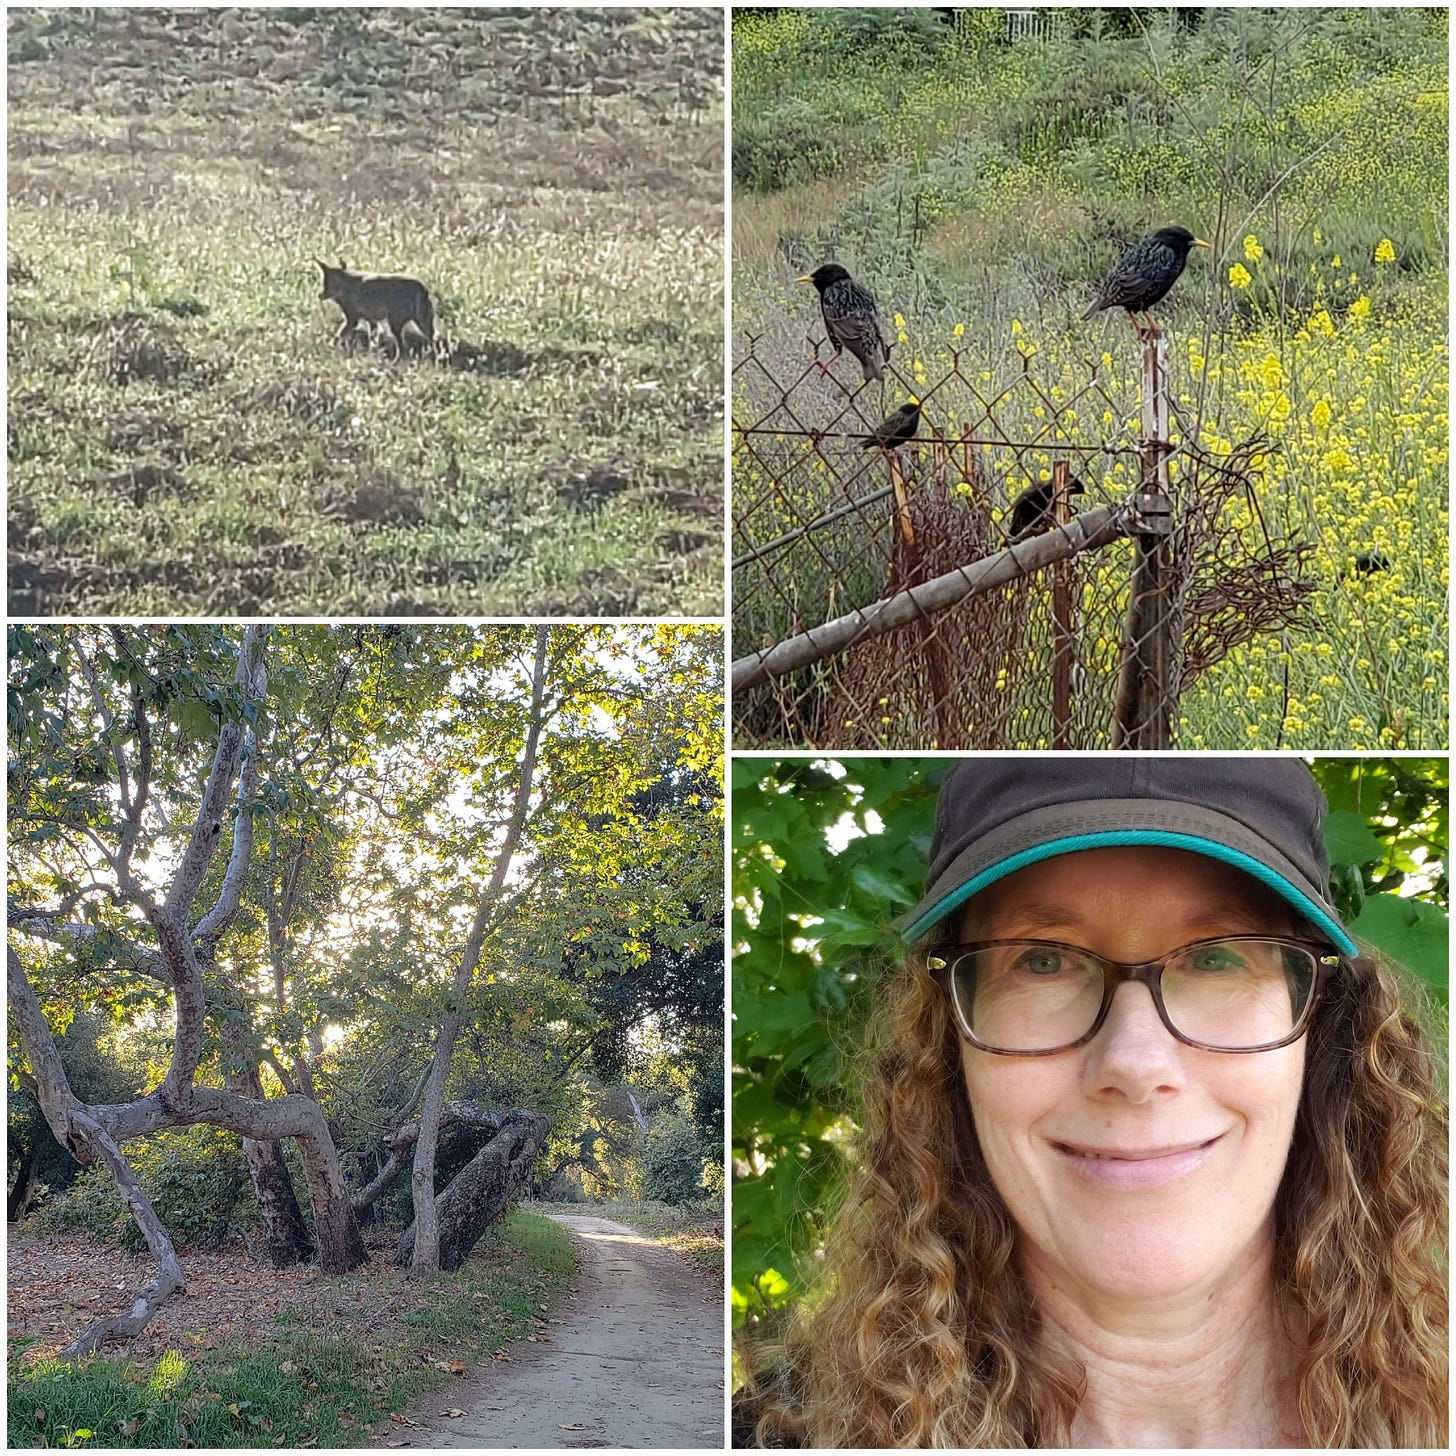 Photos by Steph of a coyote, starlings, sycamore woods, and a photo of Steph.